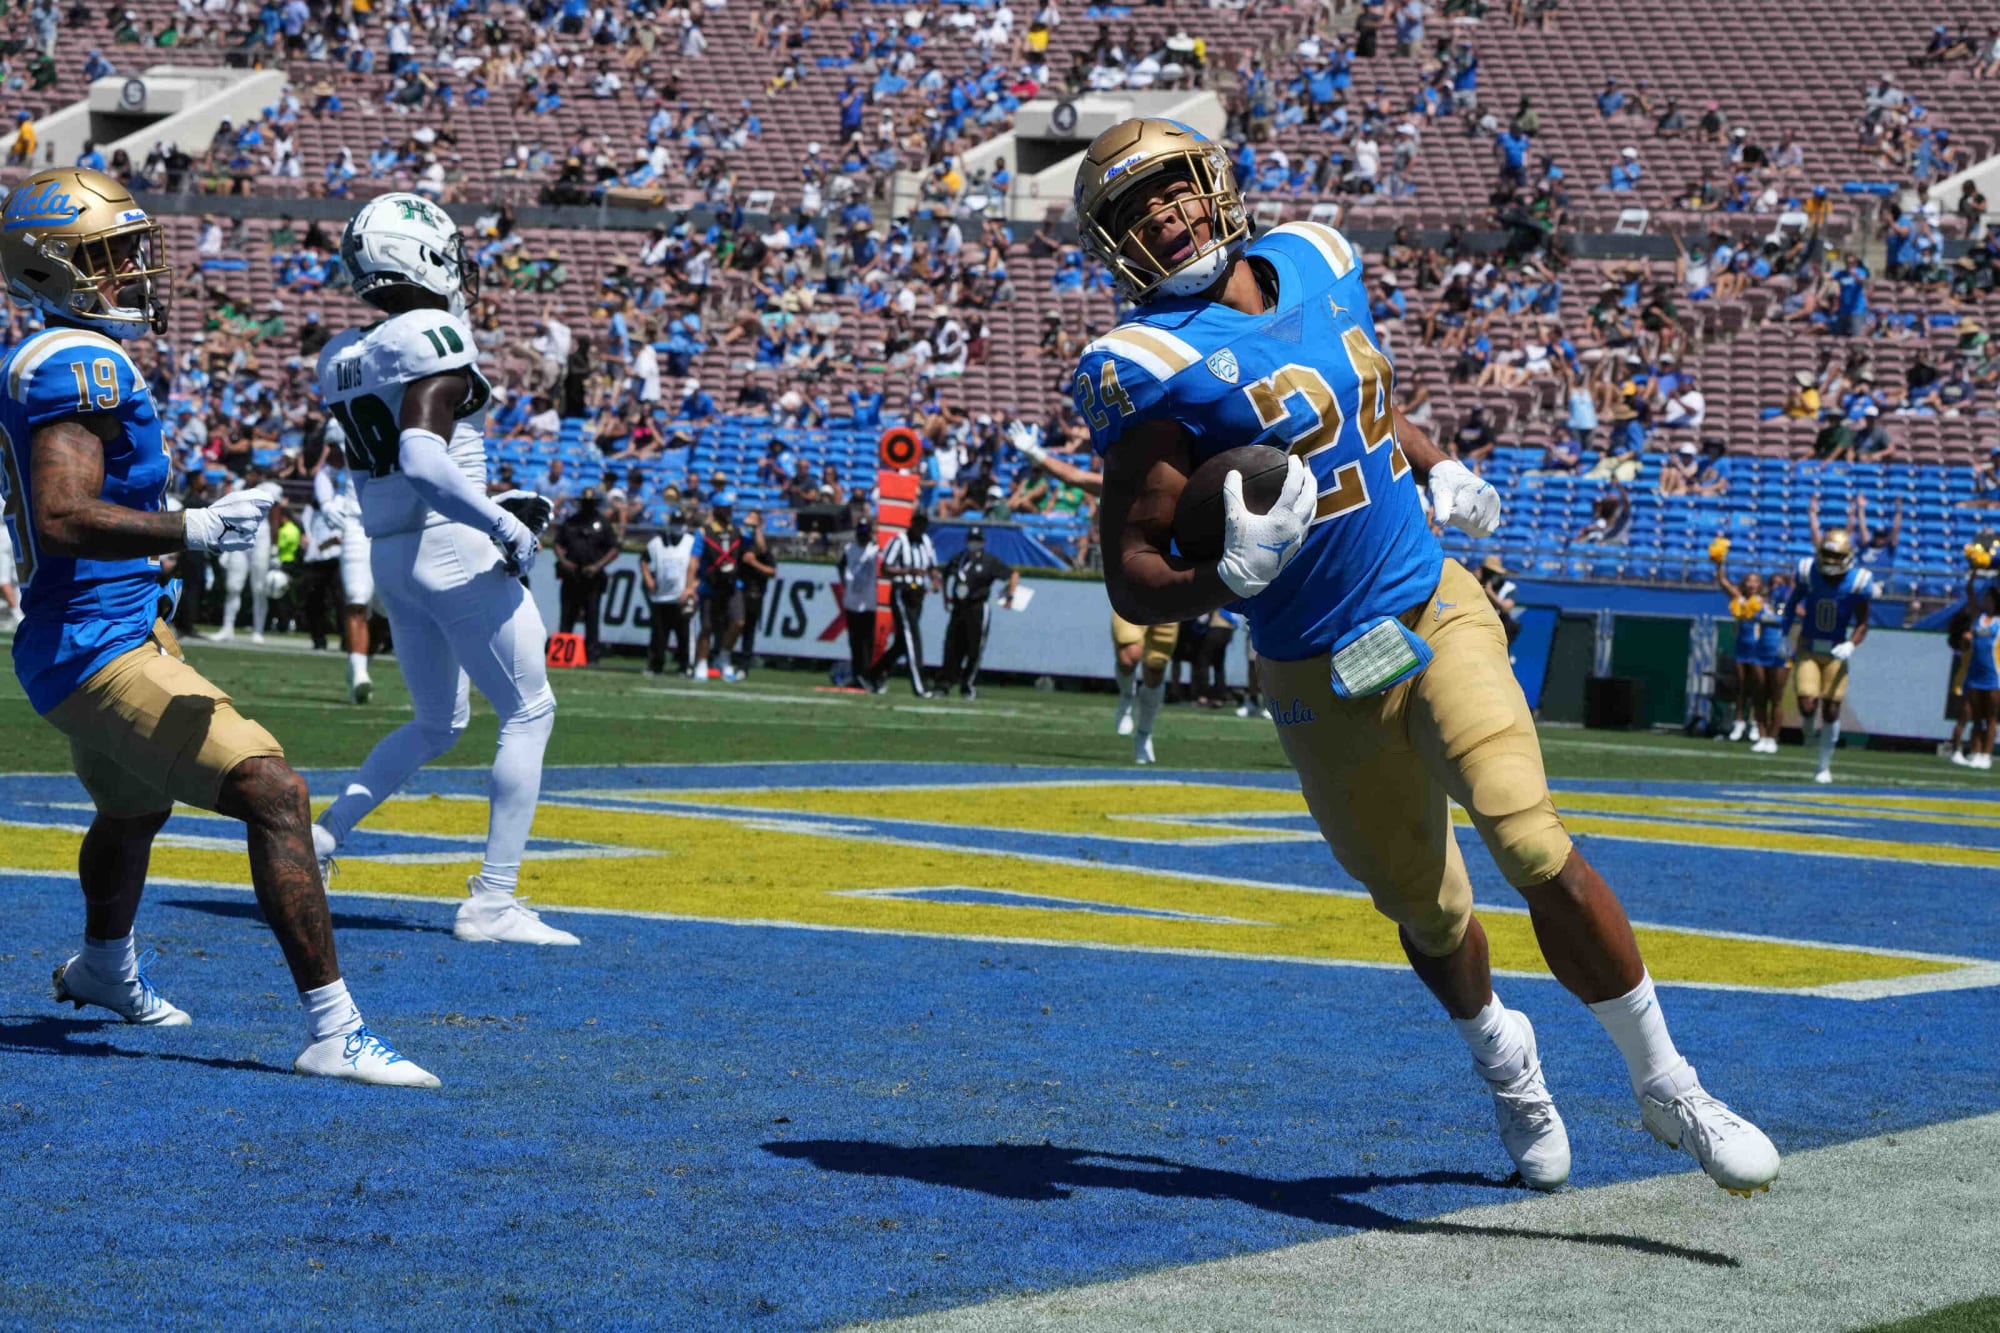 2022 NFL Draft UCLA RB Zach shows promise in opener